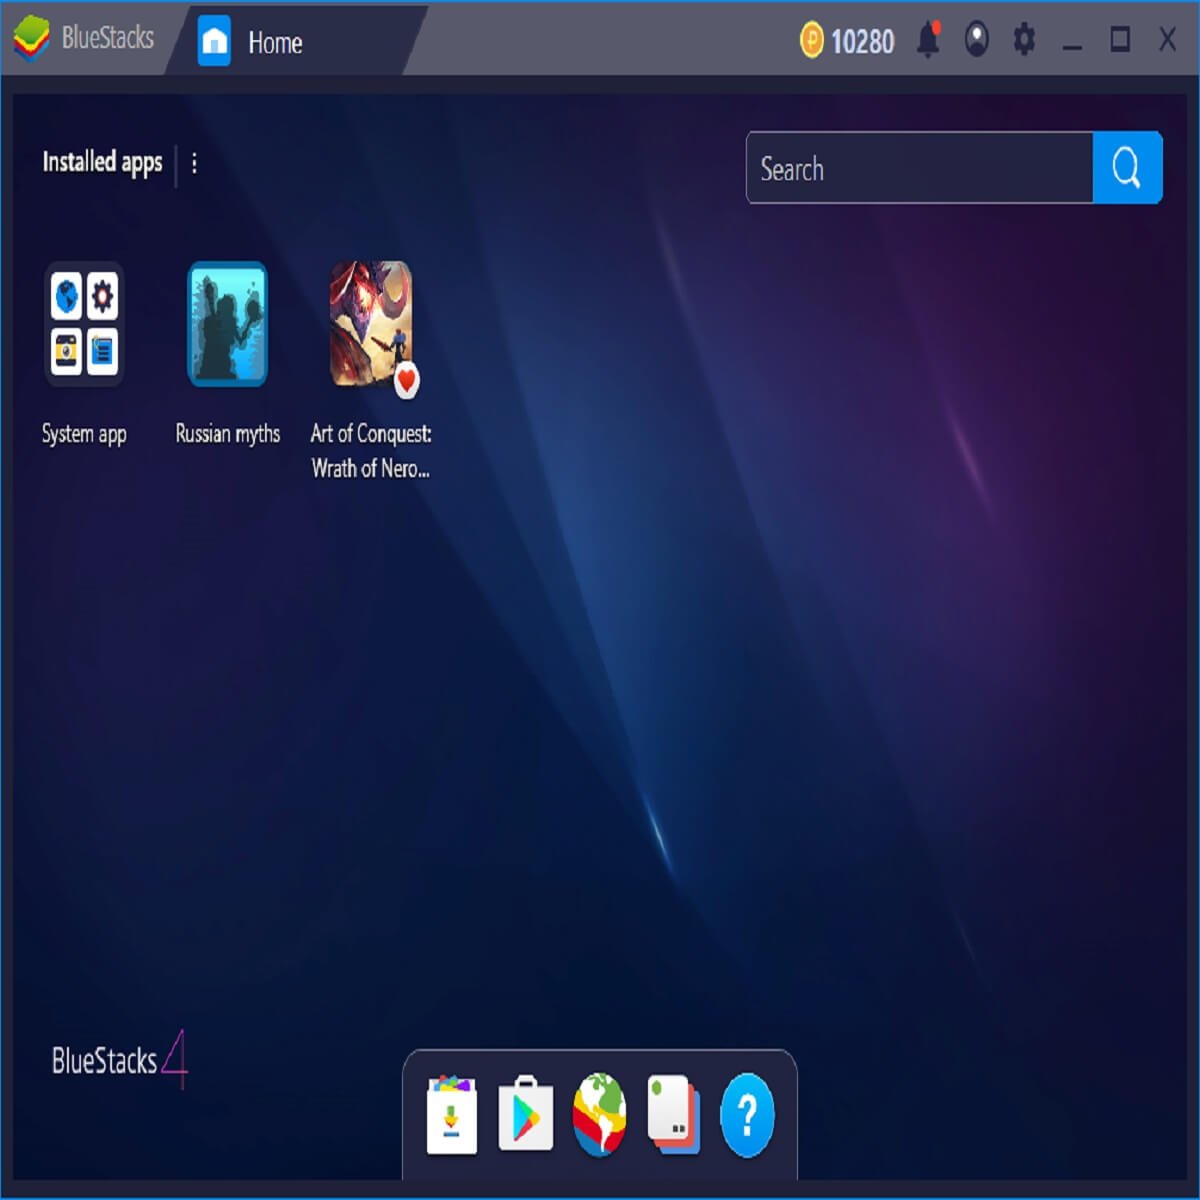 How To Speed Up Bluestacks For Faster Android Gaming On Pc